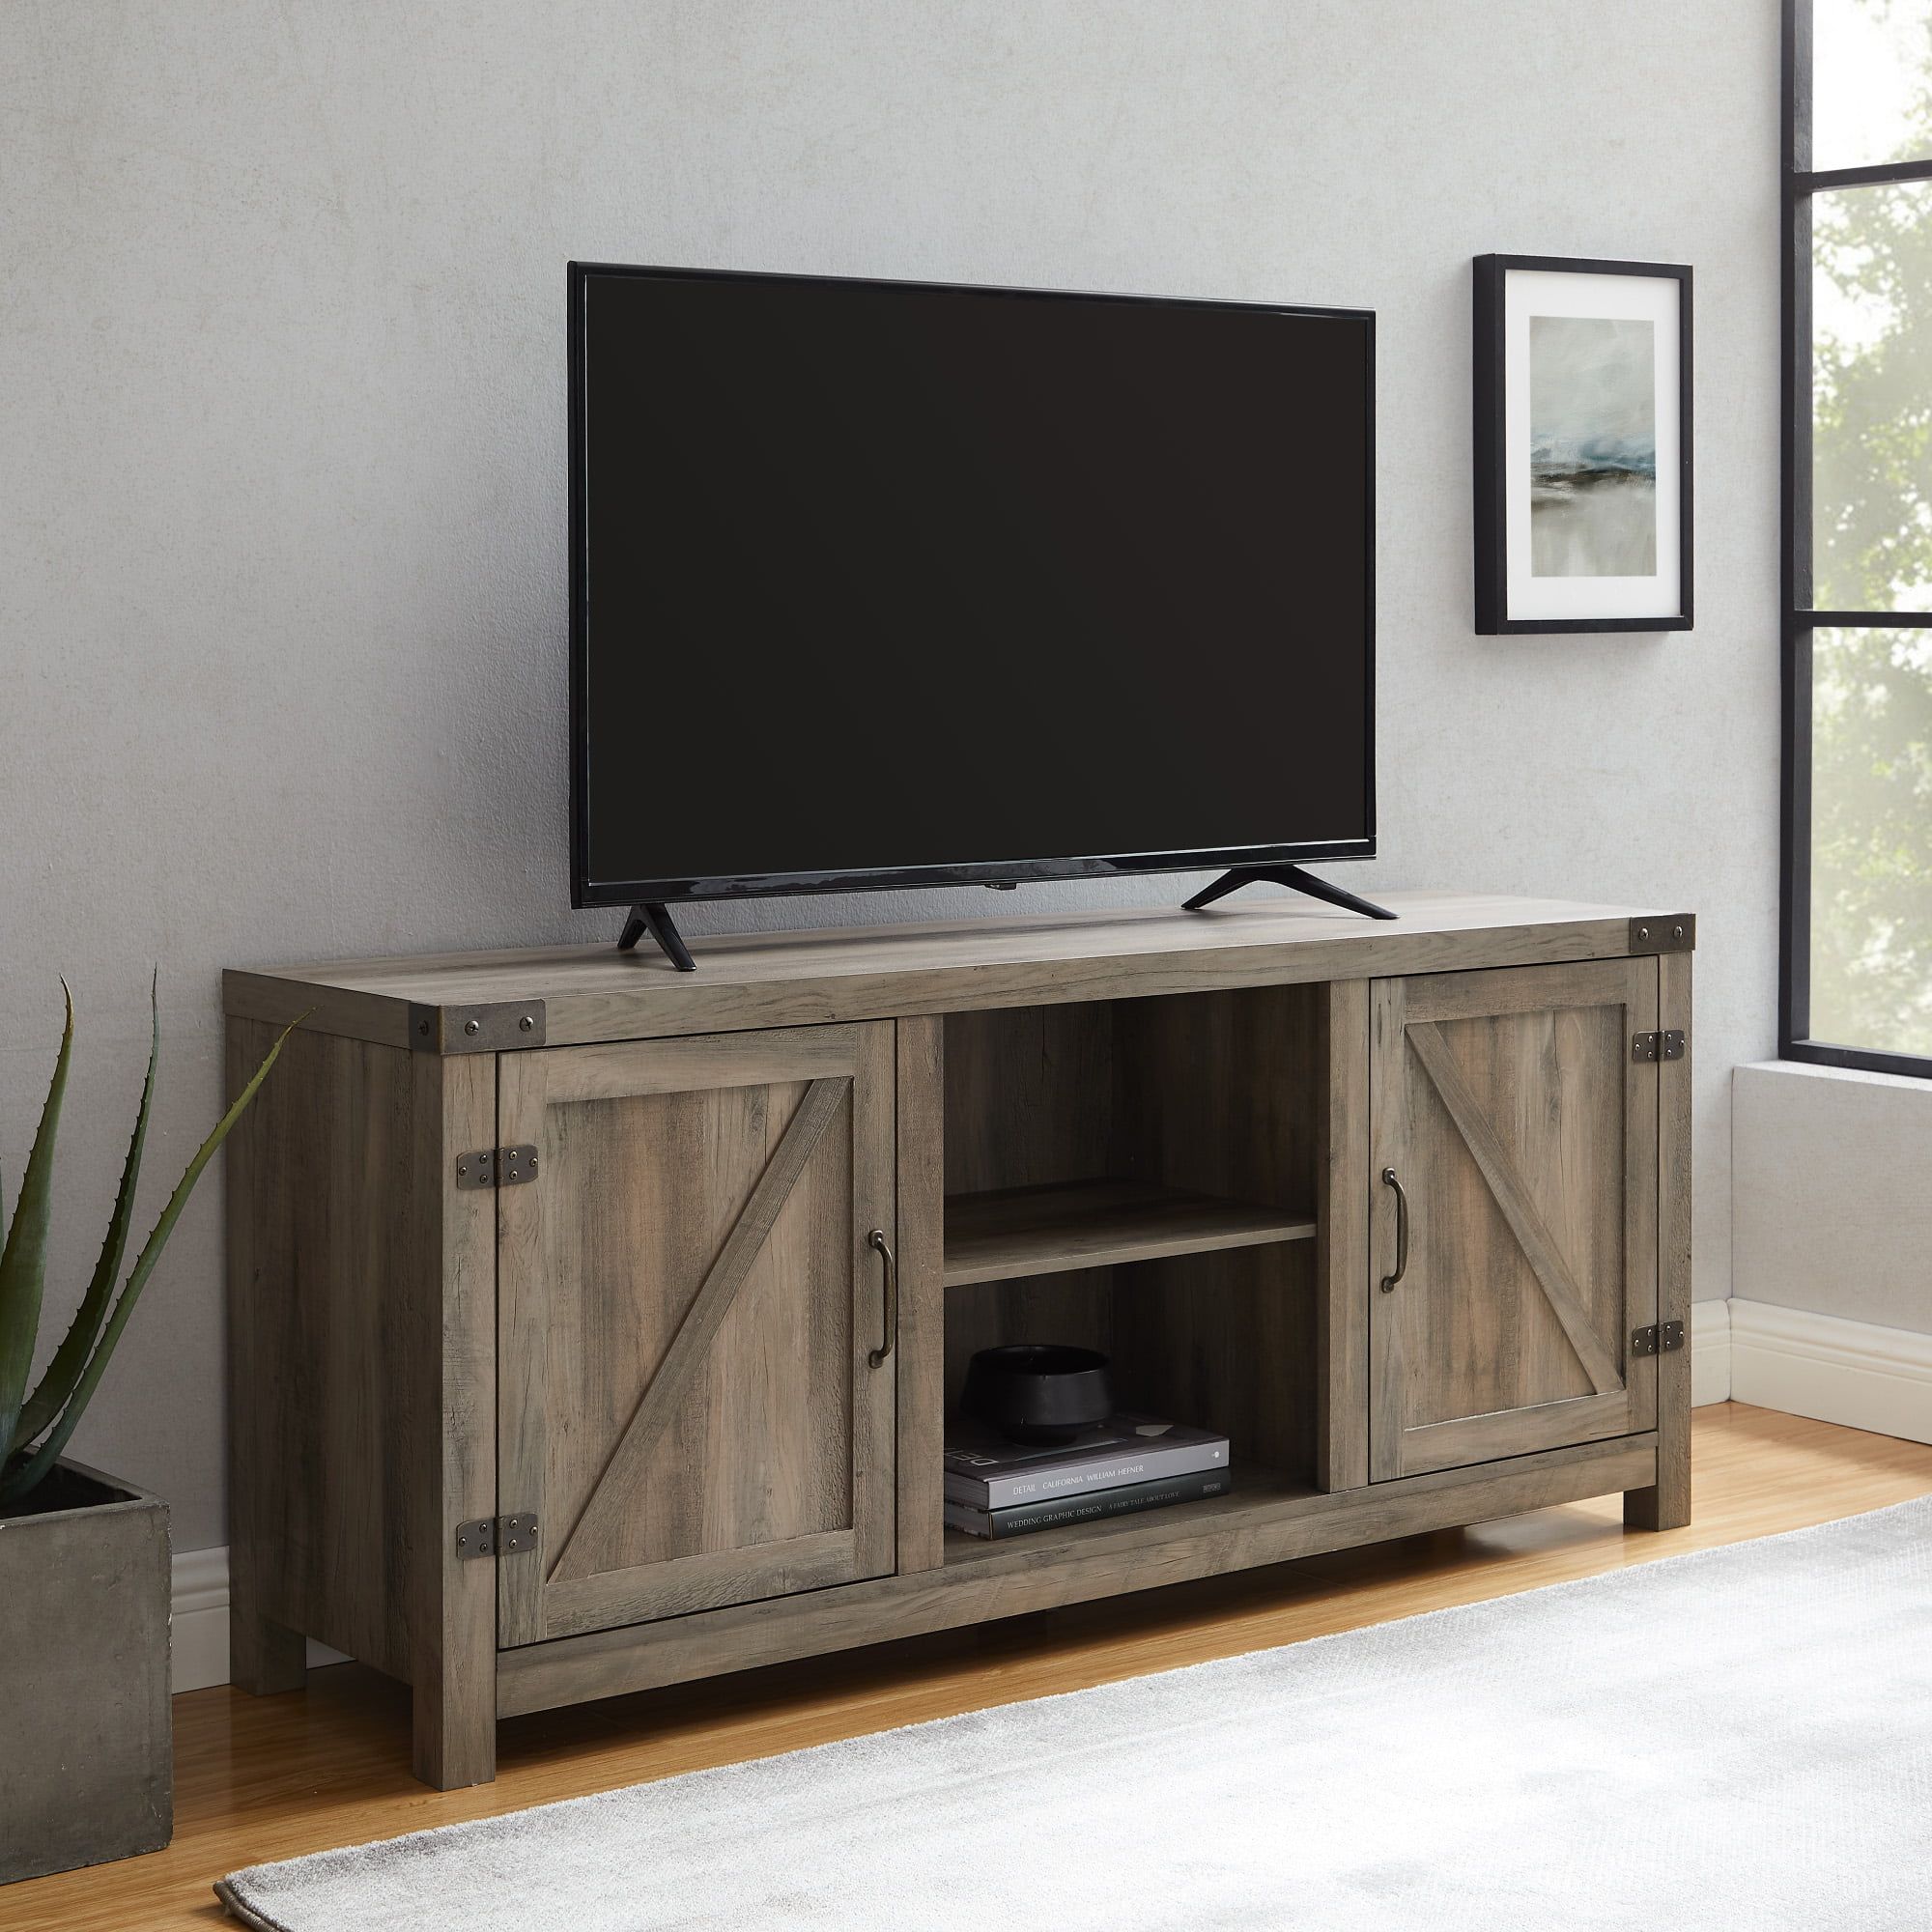 Tv Stands 65 Inch : Woven Paths Modern Farmhouse Barn Door Tv Stand For Inside Modern Farmhouse Barn Tv Stands (View 9 of 20)